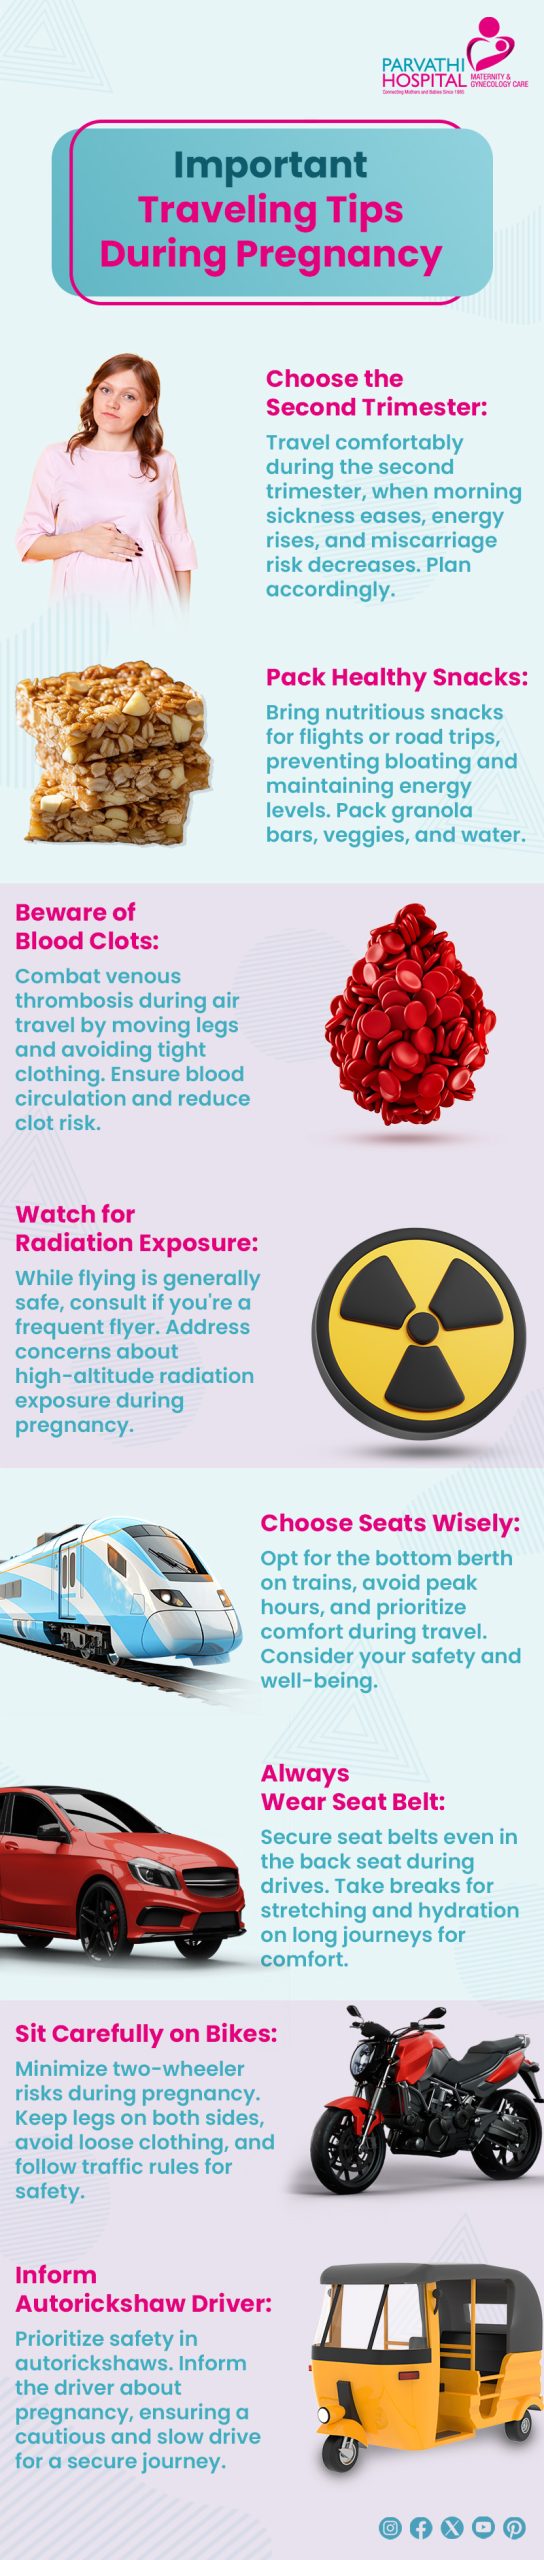 Traveling Tips During Pregnancy